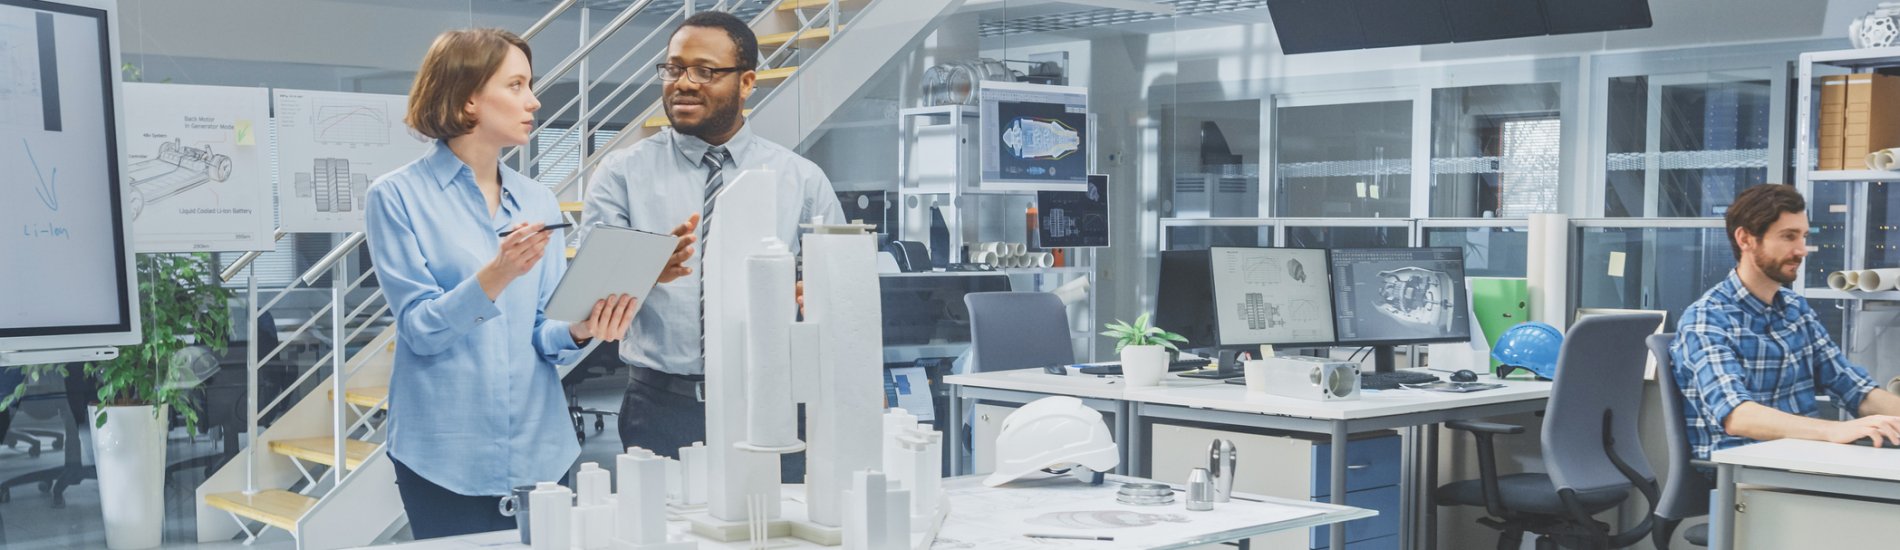 Two people in an office working on a city model.